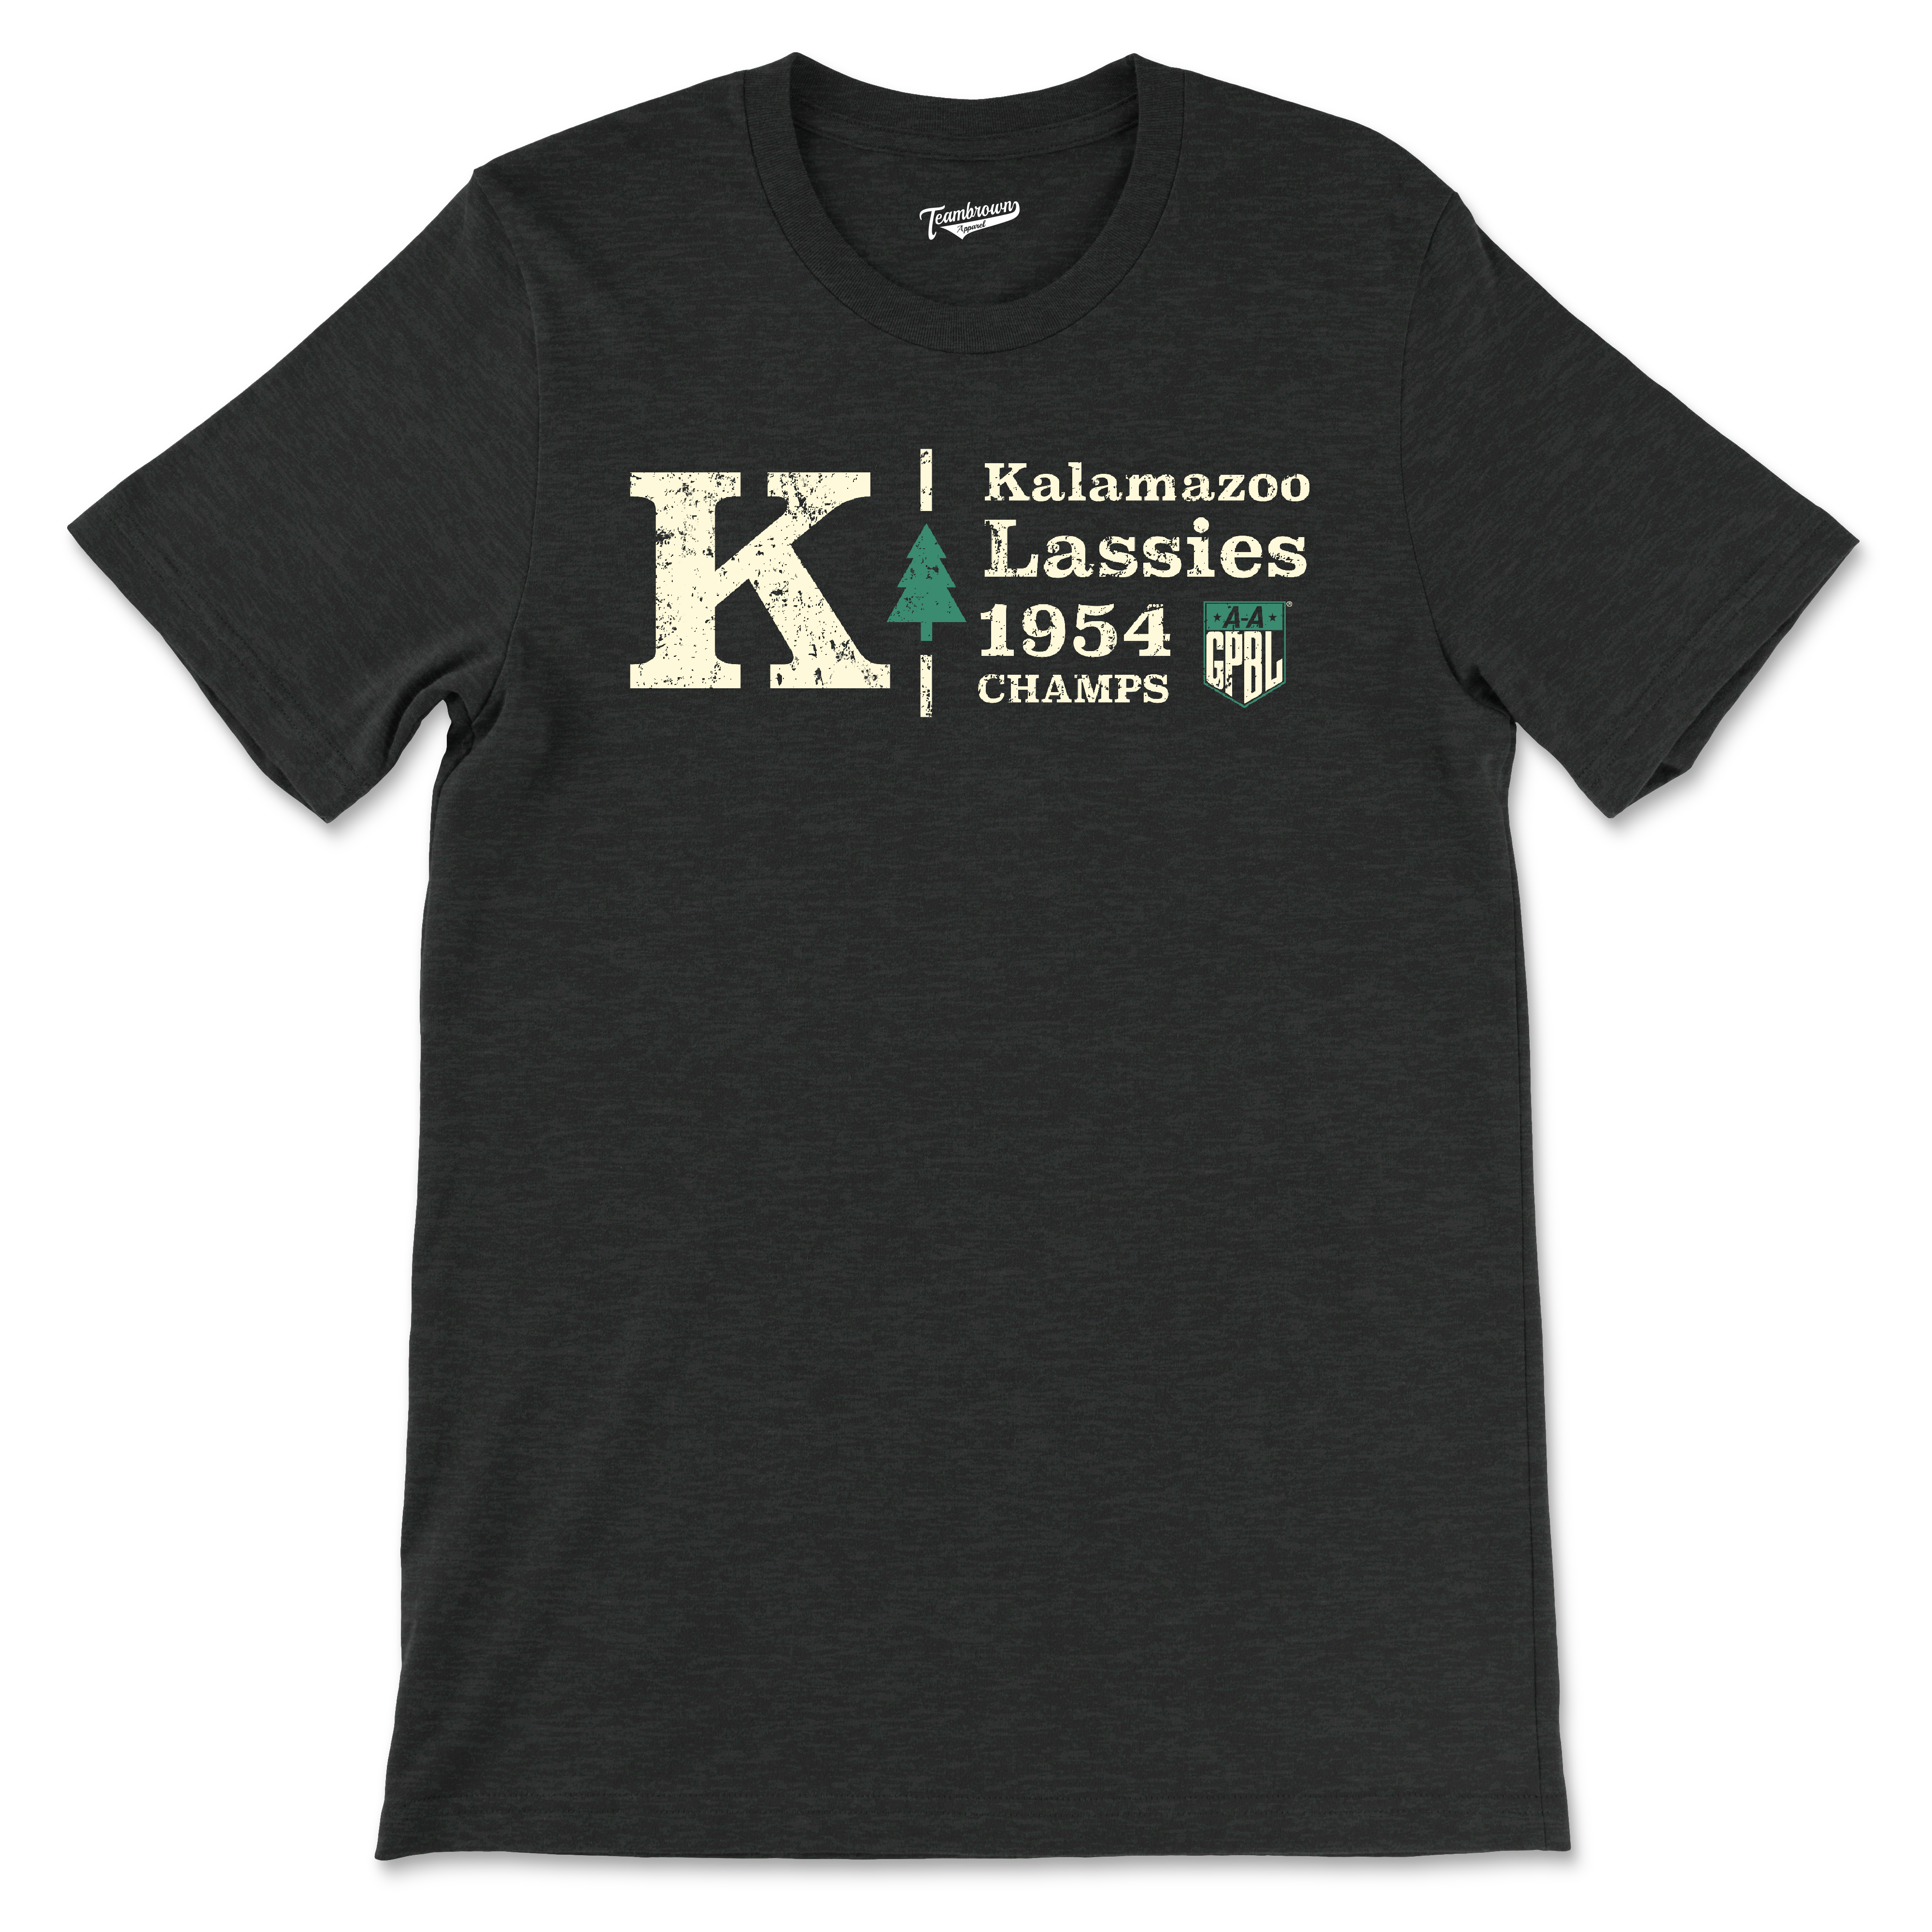 Kalamazoo Lassies Champions - Unisex T-Shirt | Officially Licensed - AAGPBL